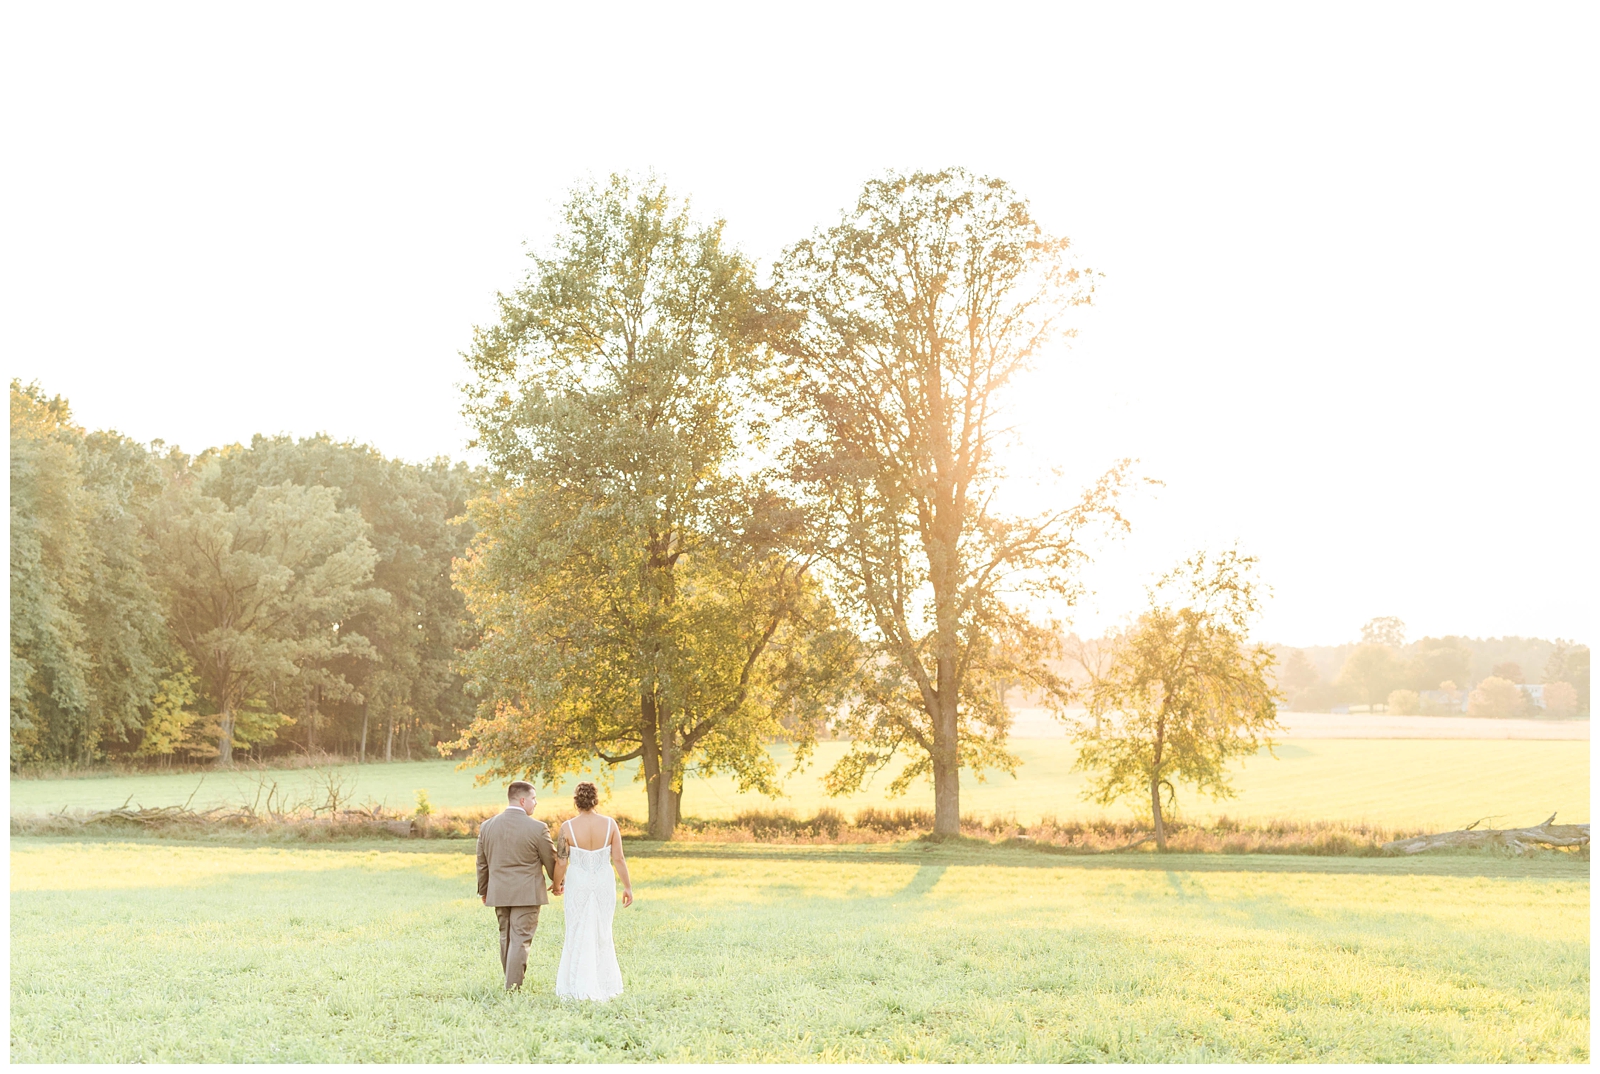 Bride and groom sunset photos in field